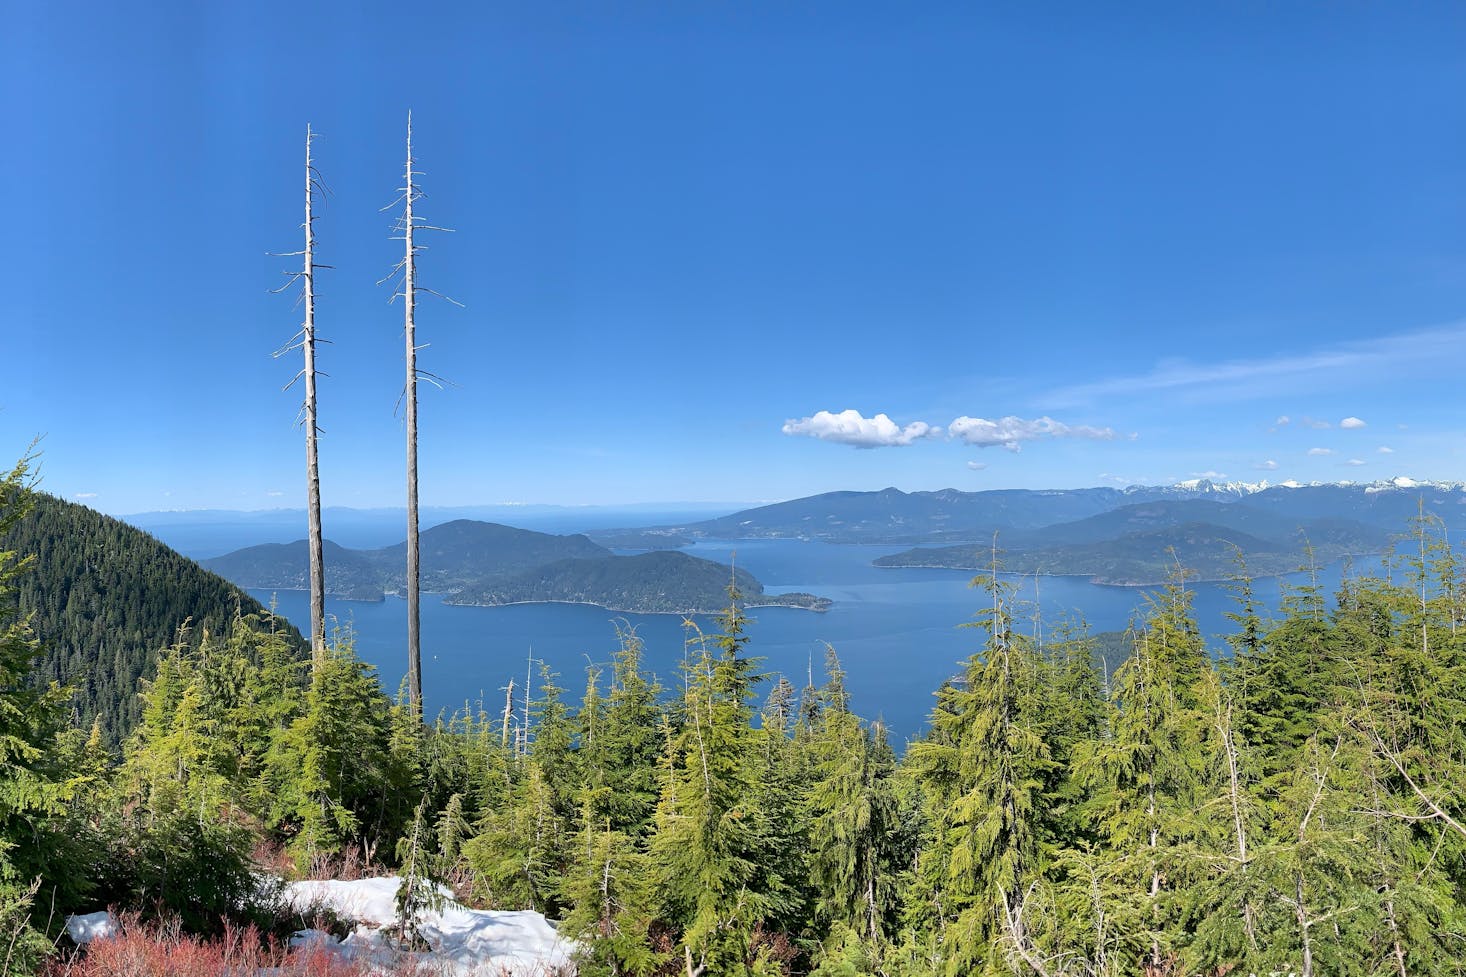 Summit view from Vancouver Mountain